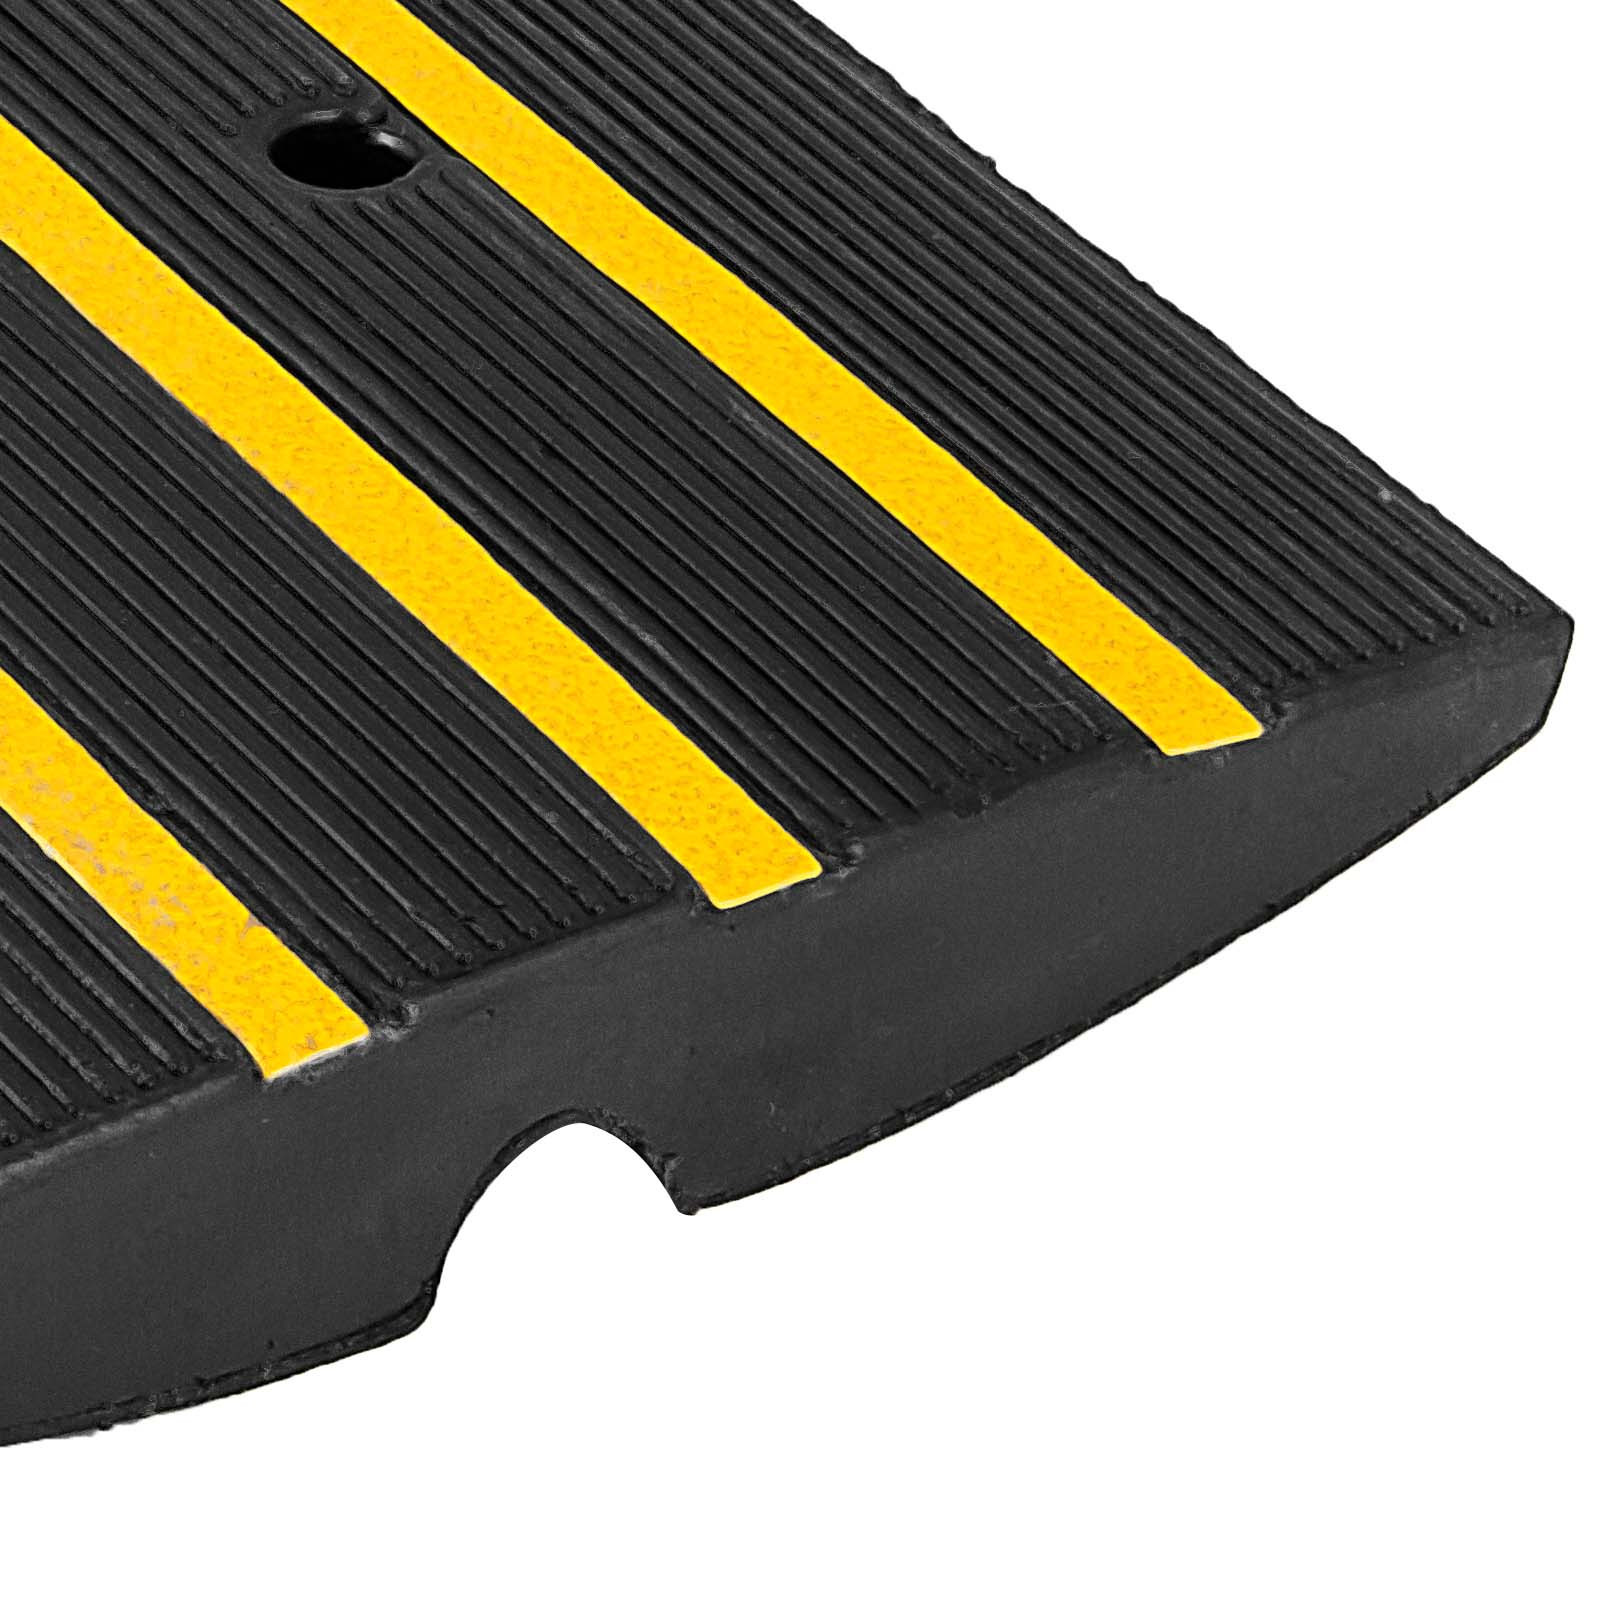 Rubber Curb Ramps Car Driveway Threshold Ramp Cable Cover Curbside ...